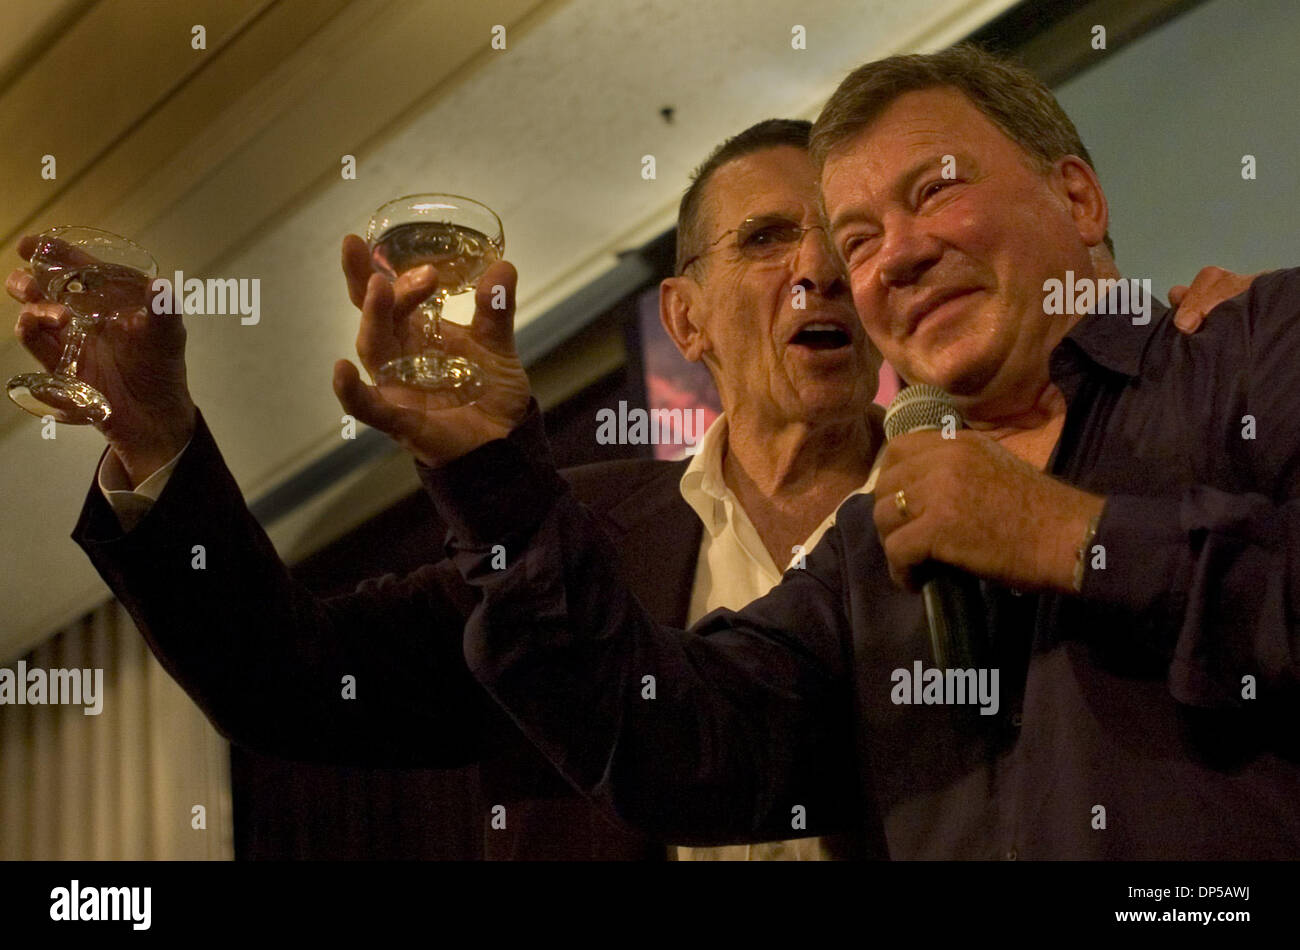 Sep 10, 2006; Sacramento, CA, USA; WILLIAM SHATNER who played Caption Kirk and LEONARD NIMOY who played Mr. Spock on the series Star Trek, celebrated the 40th anniversary of Star Trek by toasting champagne together during a rare appearance together at a convention at the Double Tree hotel in Sacramento on Sunday.  Mandatory Credit: Photo by RenZe C. Byer/Sacramanto Bee/ZUMA Press.  Stock Photo